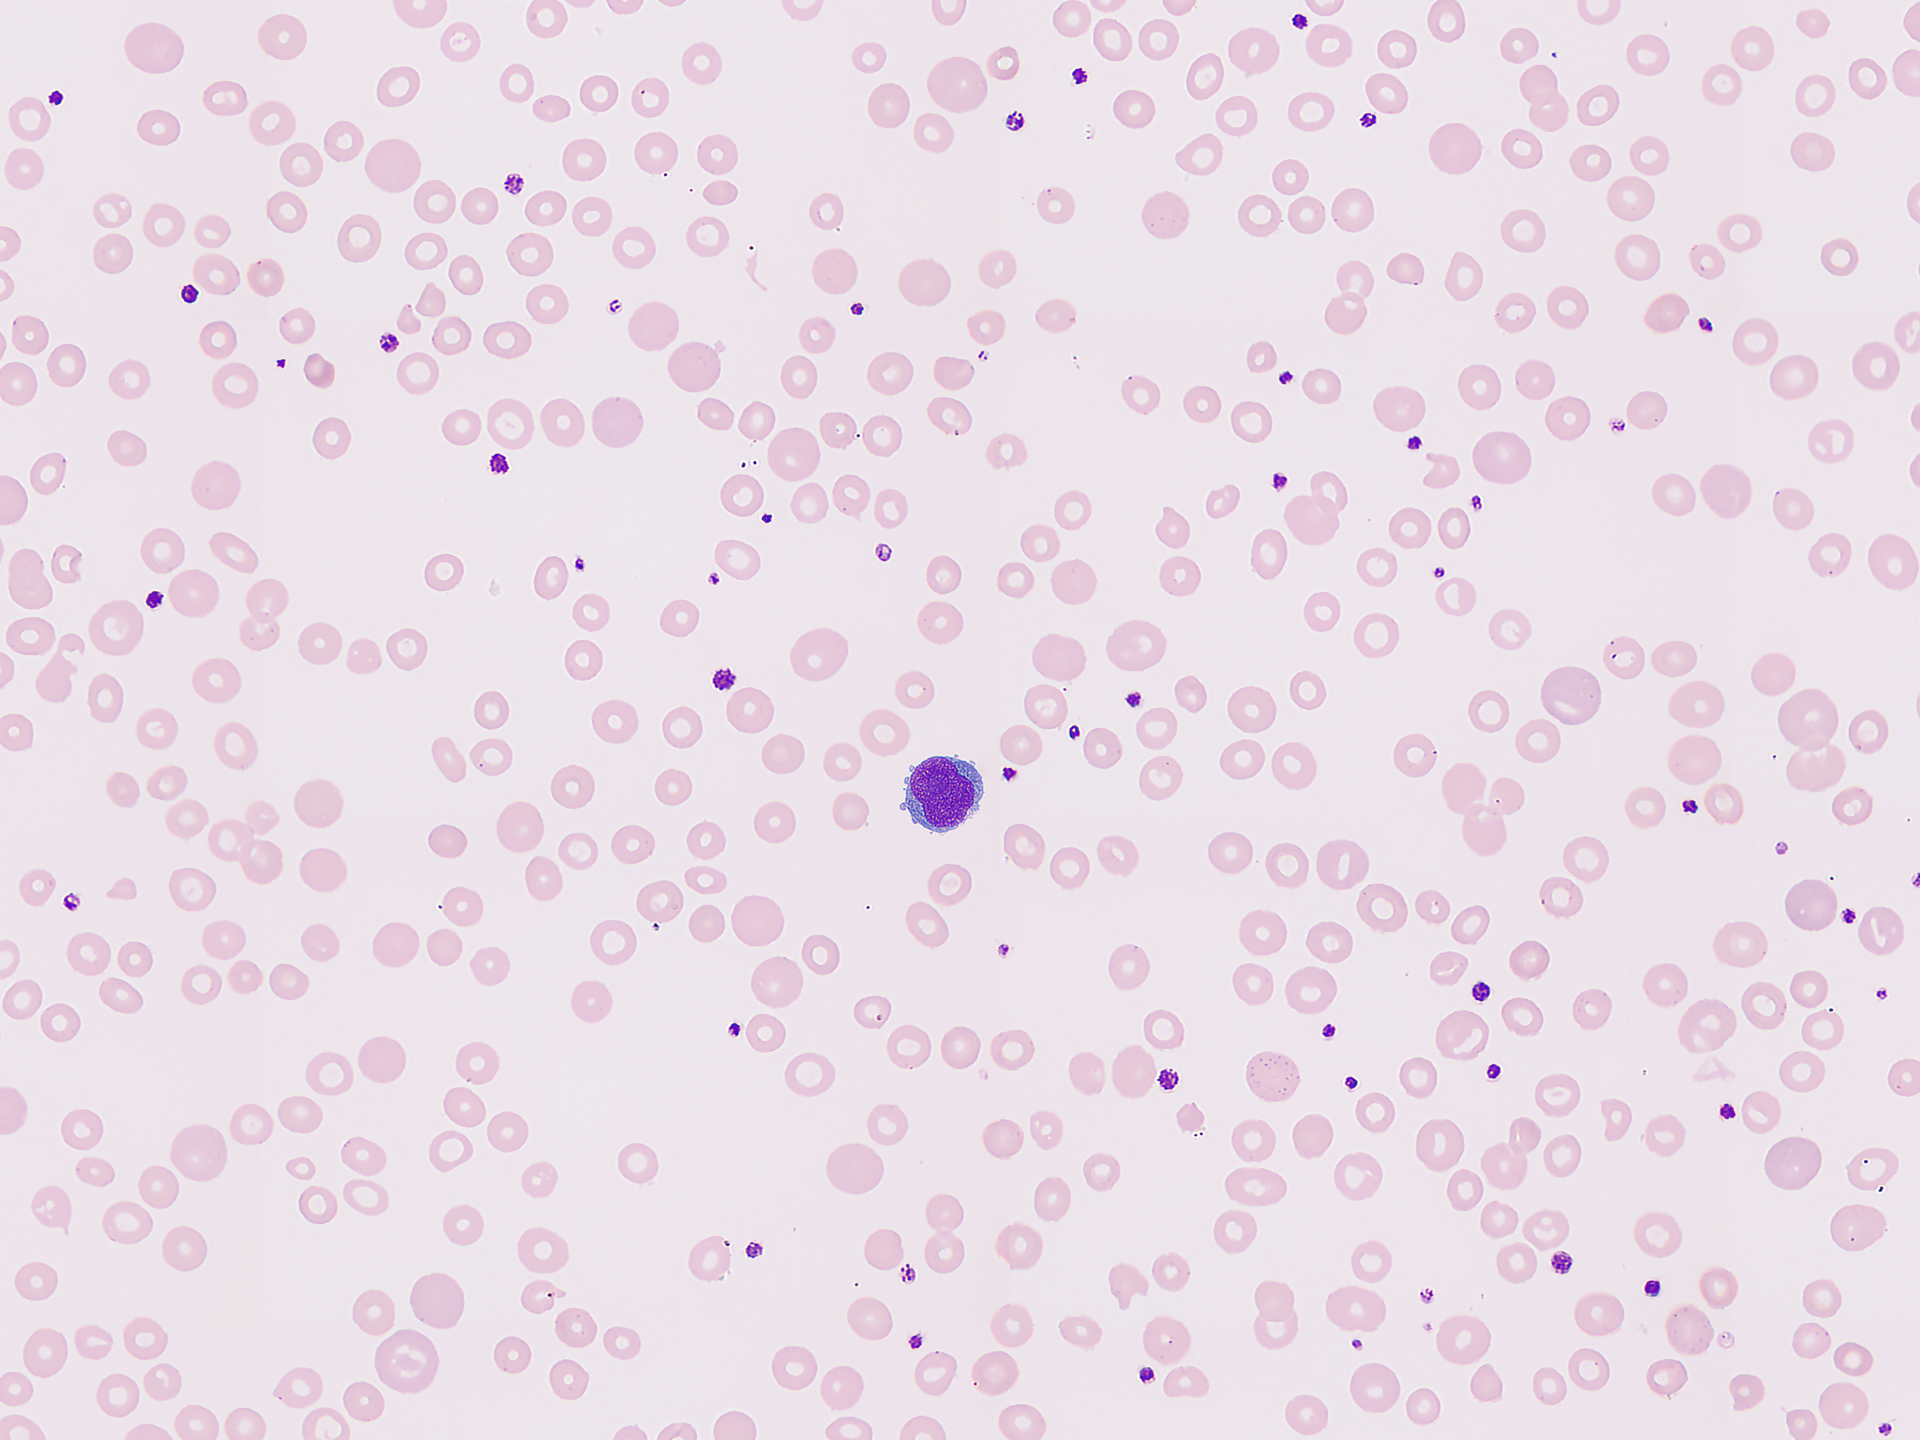 blood cells image from Mindray